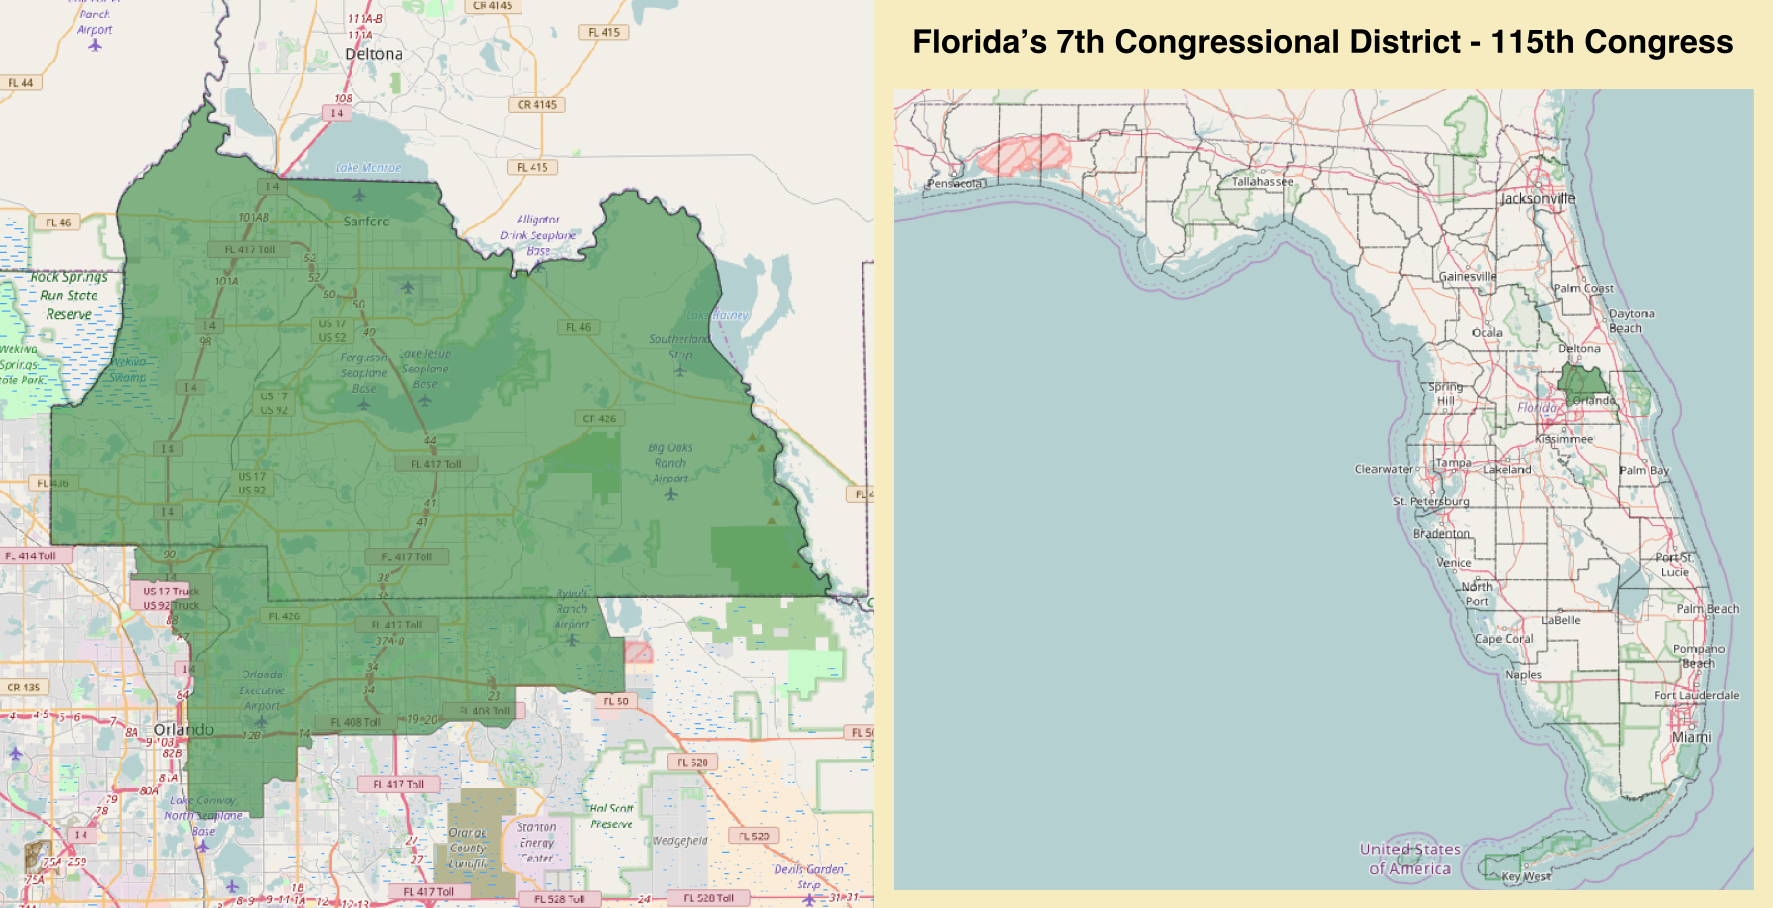 12 candidates faceoff in primary election for Florida Congressional